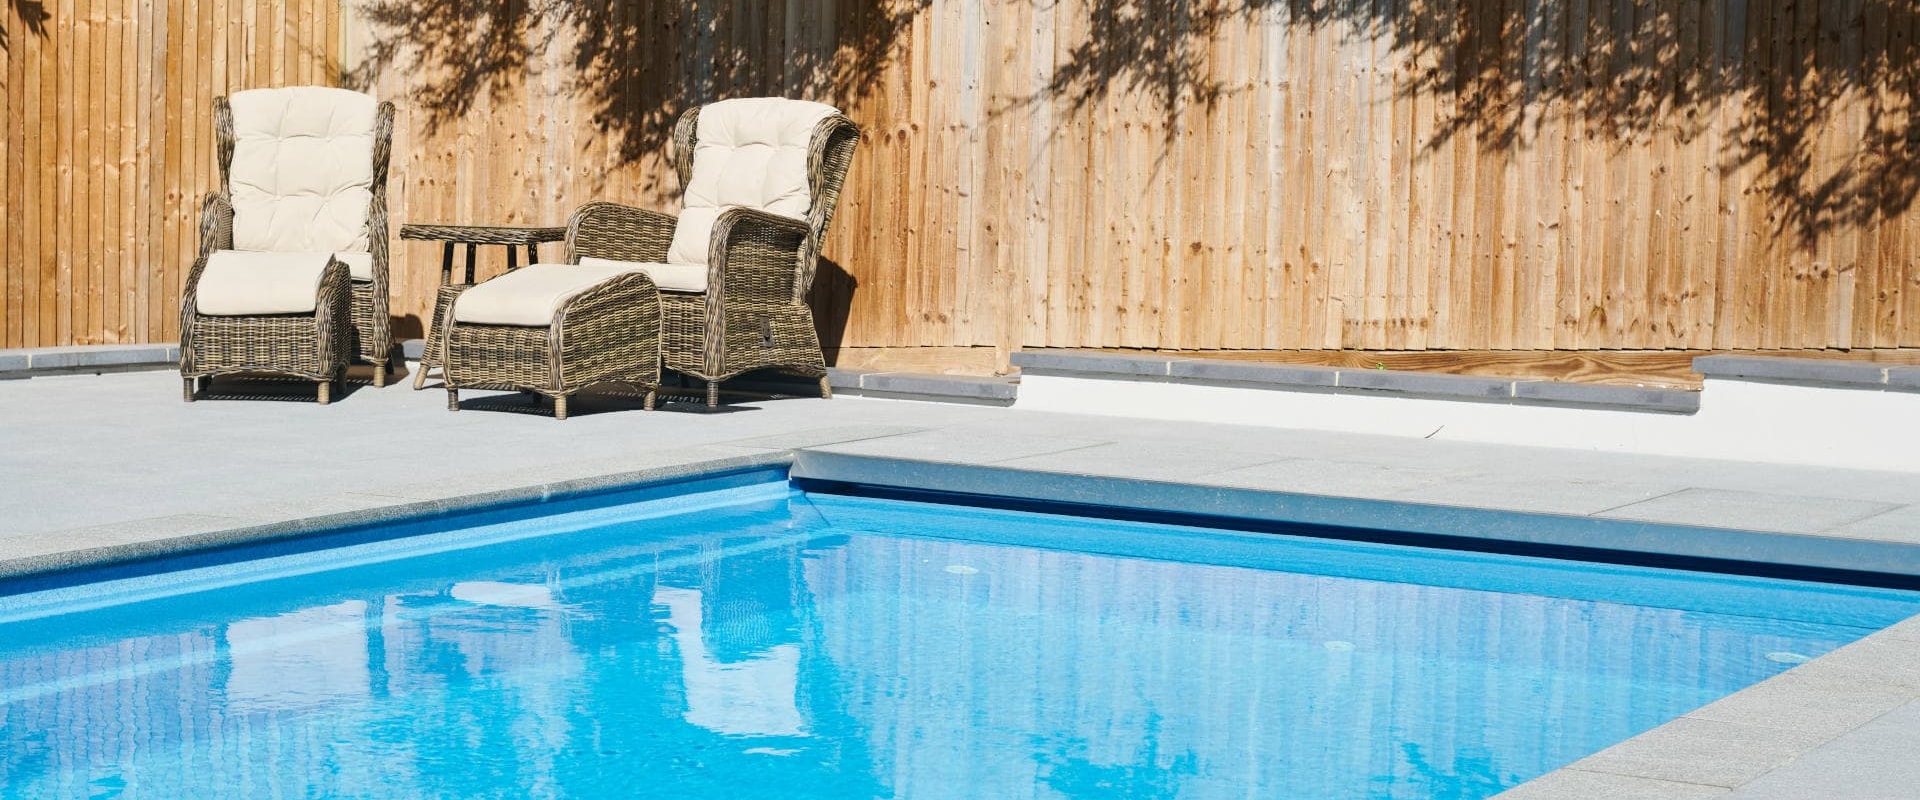 Choosing the Right Type of Pool for Your Outdoor Living Space